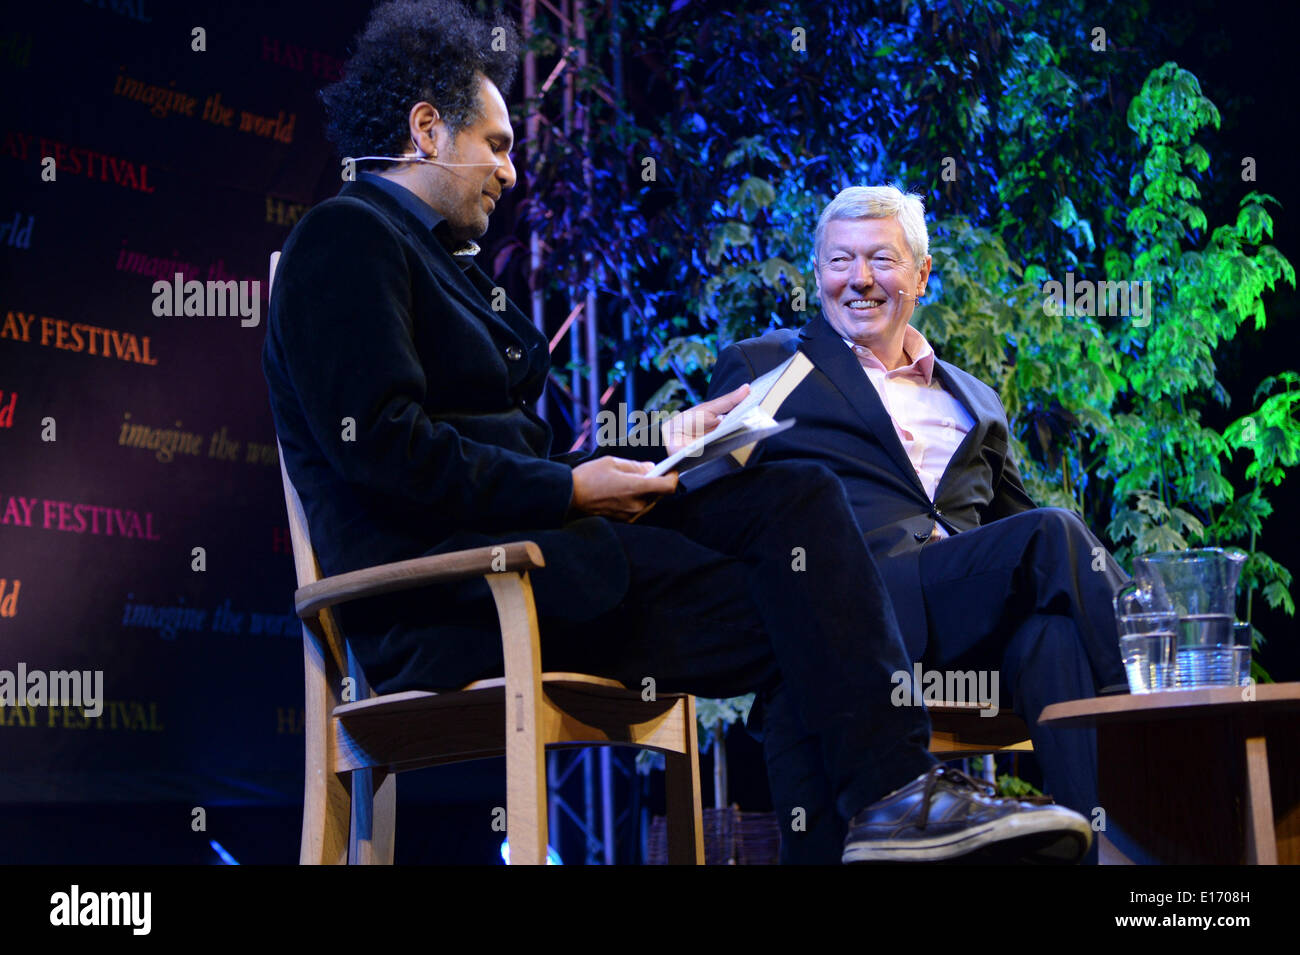 Hay on Wye, Wales UK. Sunday 25 May 2014. Former Labour cabinet member, and Orwell Prize winning author, ALAN JOHNSON talks to SARFRAZ MANZOOR on the fourth day of the 2014 Daily Telegraph Hay Literature Festival, Wales UK photo Credit: keith morris/Alamy Live News Stock Photo